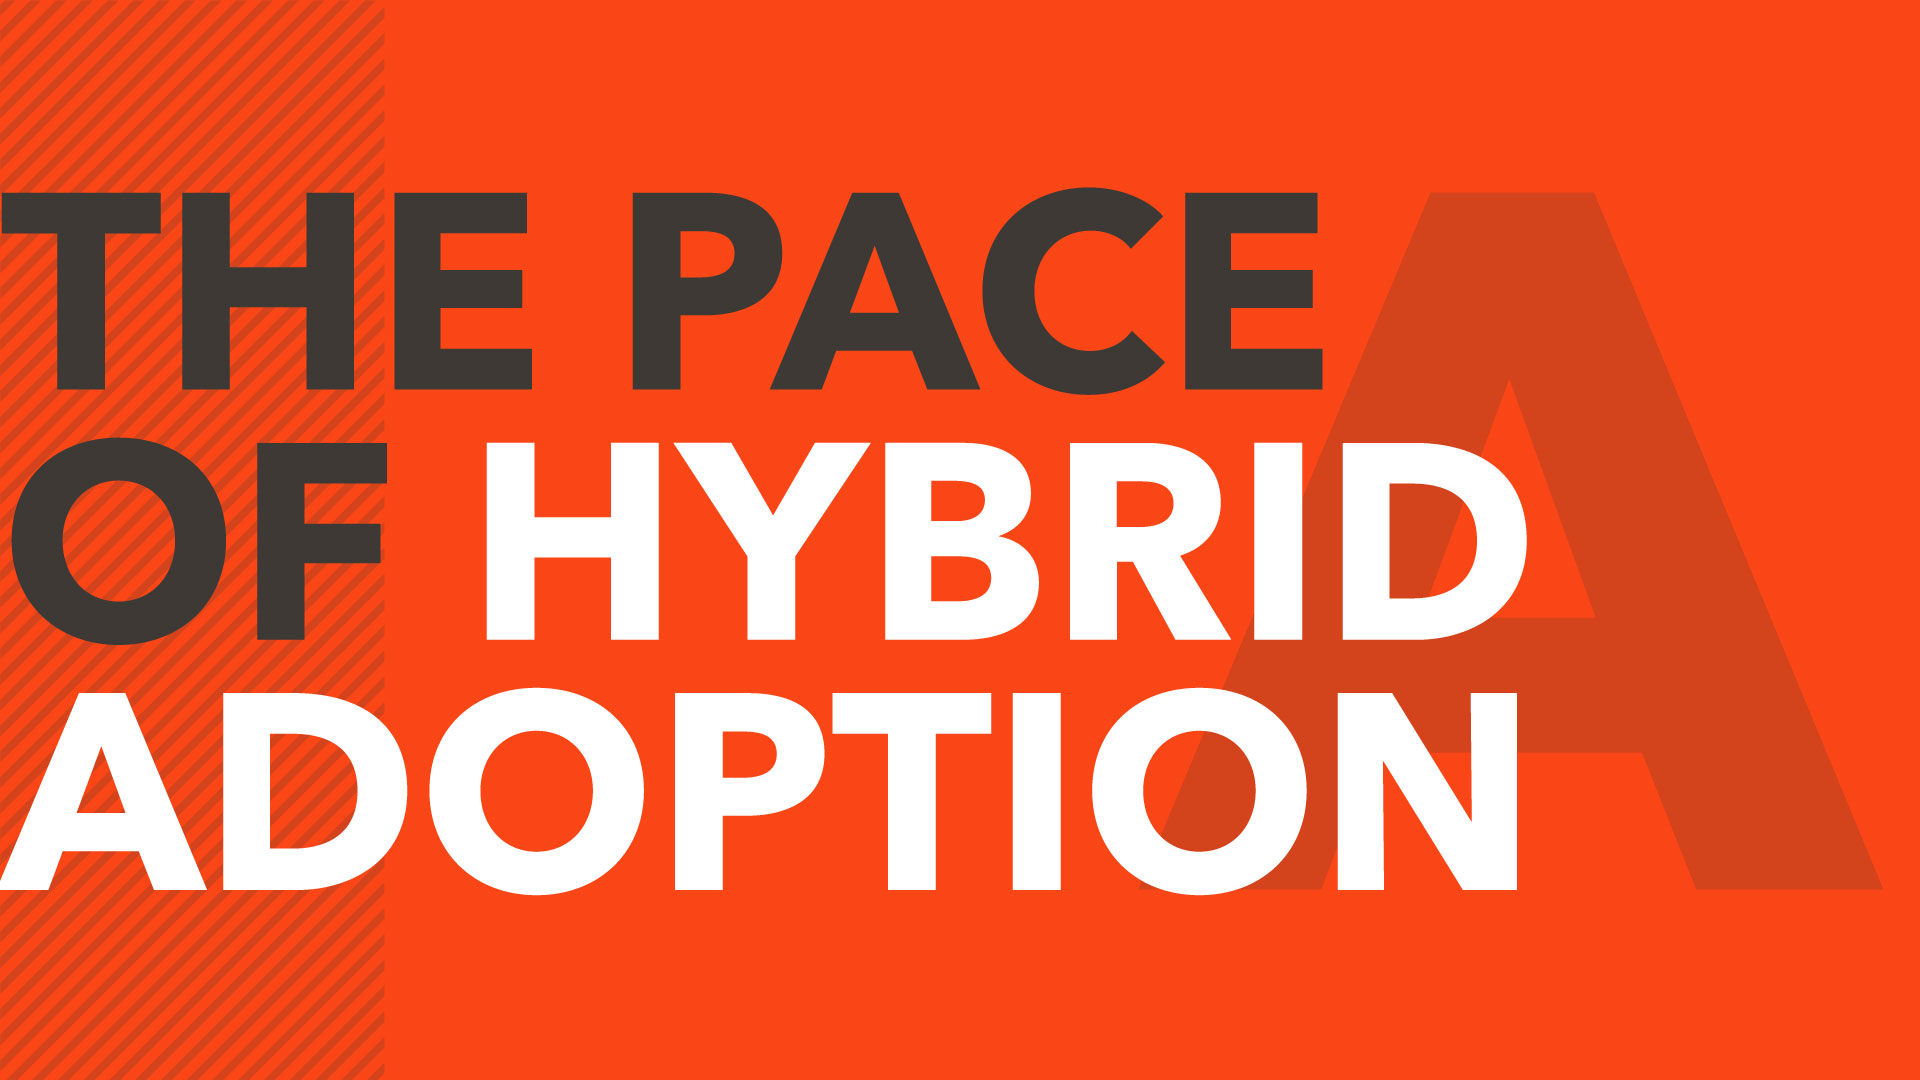 The pace of hybrid adoption